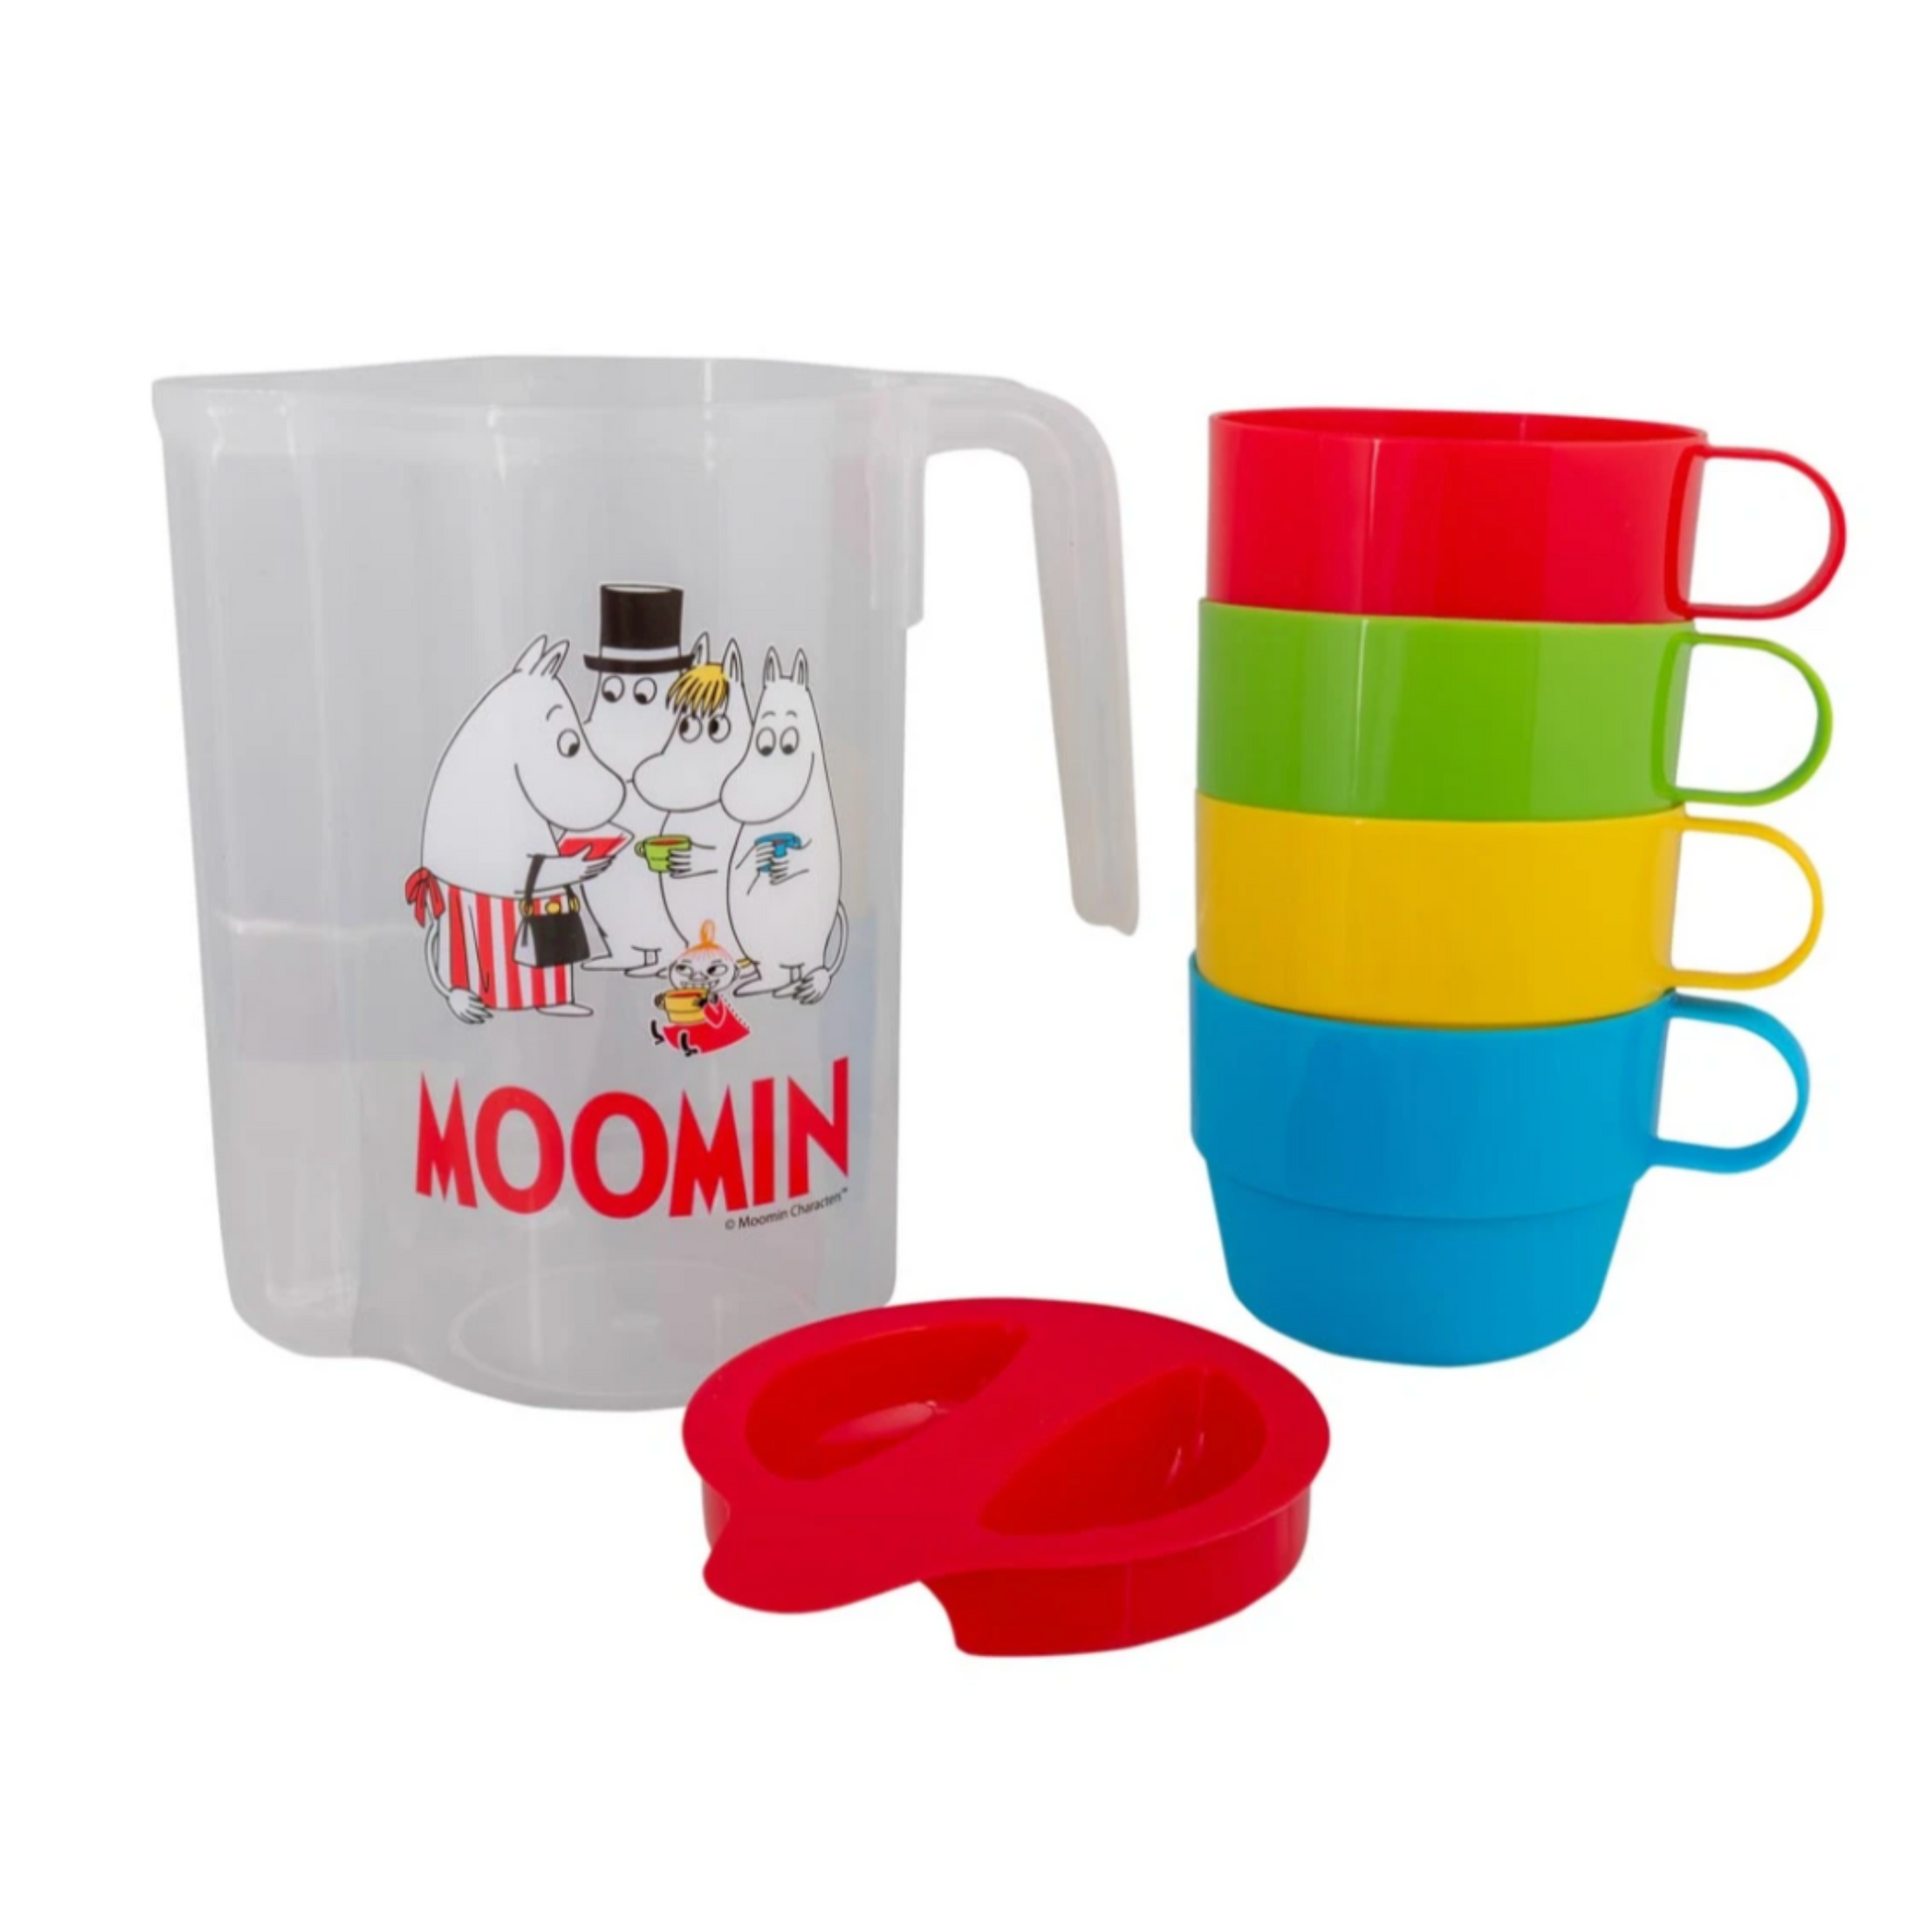 Moomin Characters Picnic Pitcher with 4 Mugs (8437581873439)